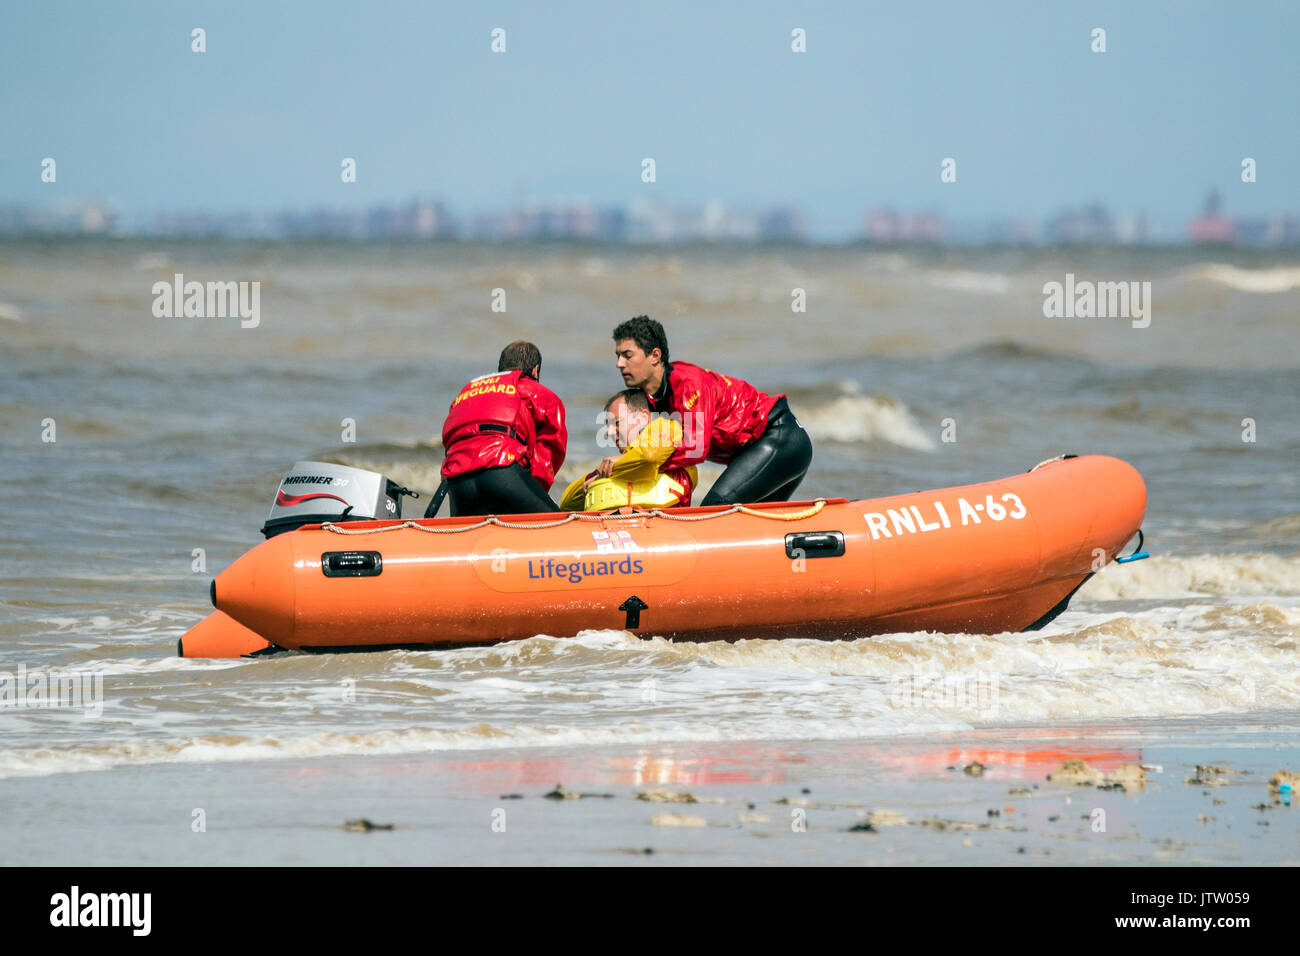 Rnli lifeguard training, sea save rescue rescuer emergency drown drowning water tide tides safety coast swim swimmer swimming guard saver life beach Southport seaside, UK Stock Photo